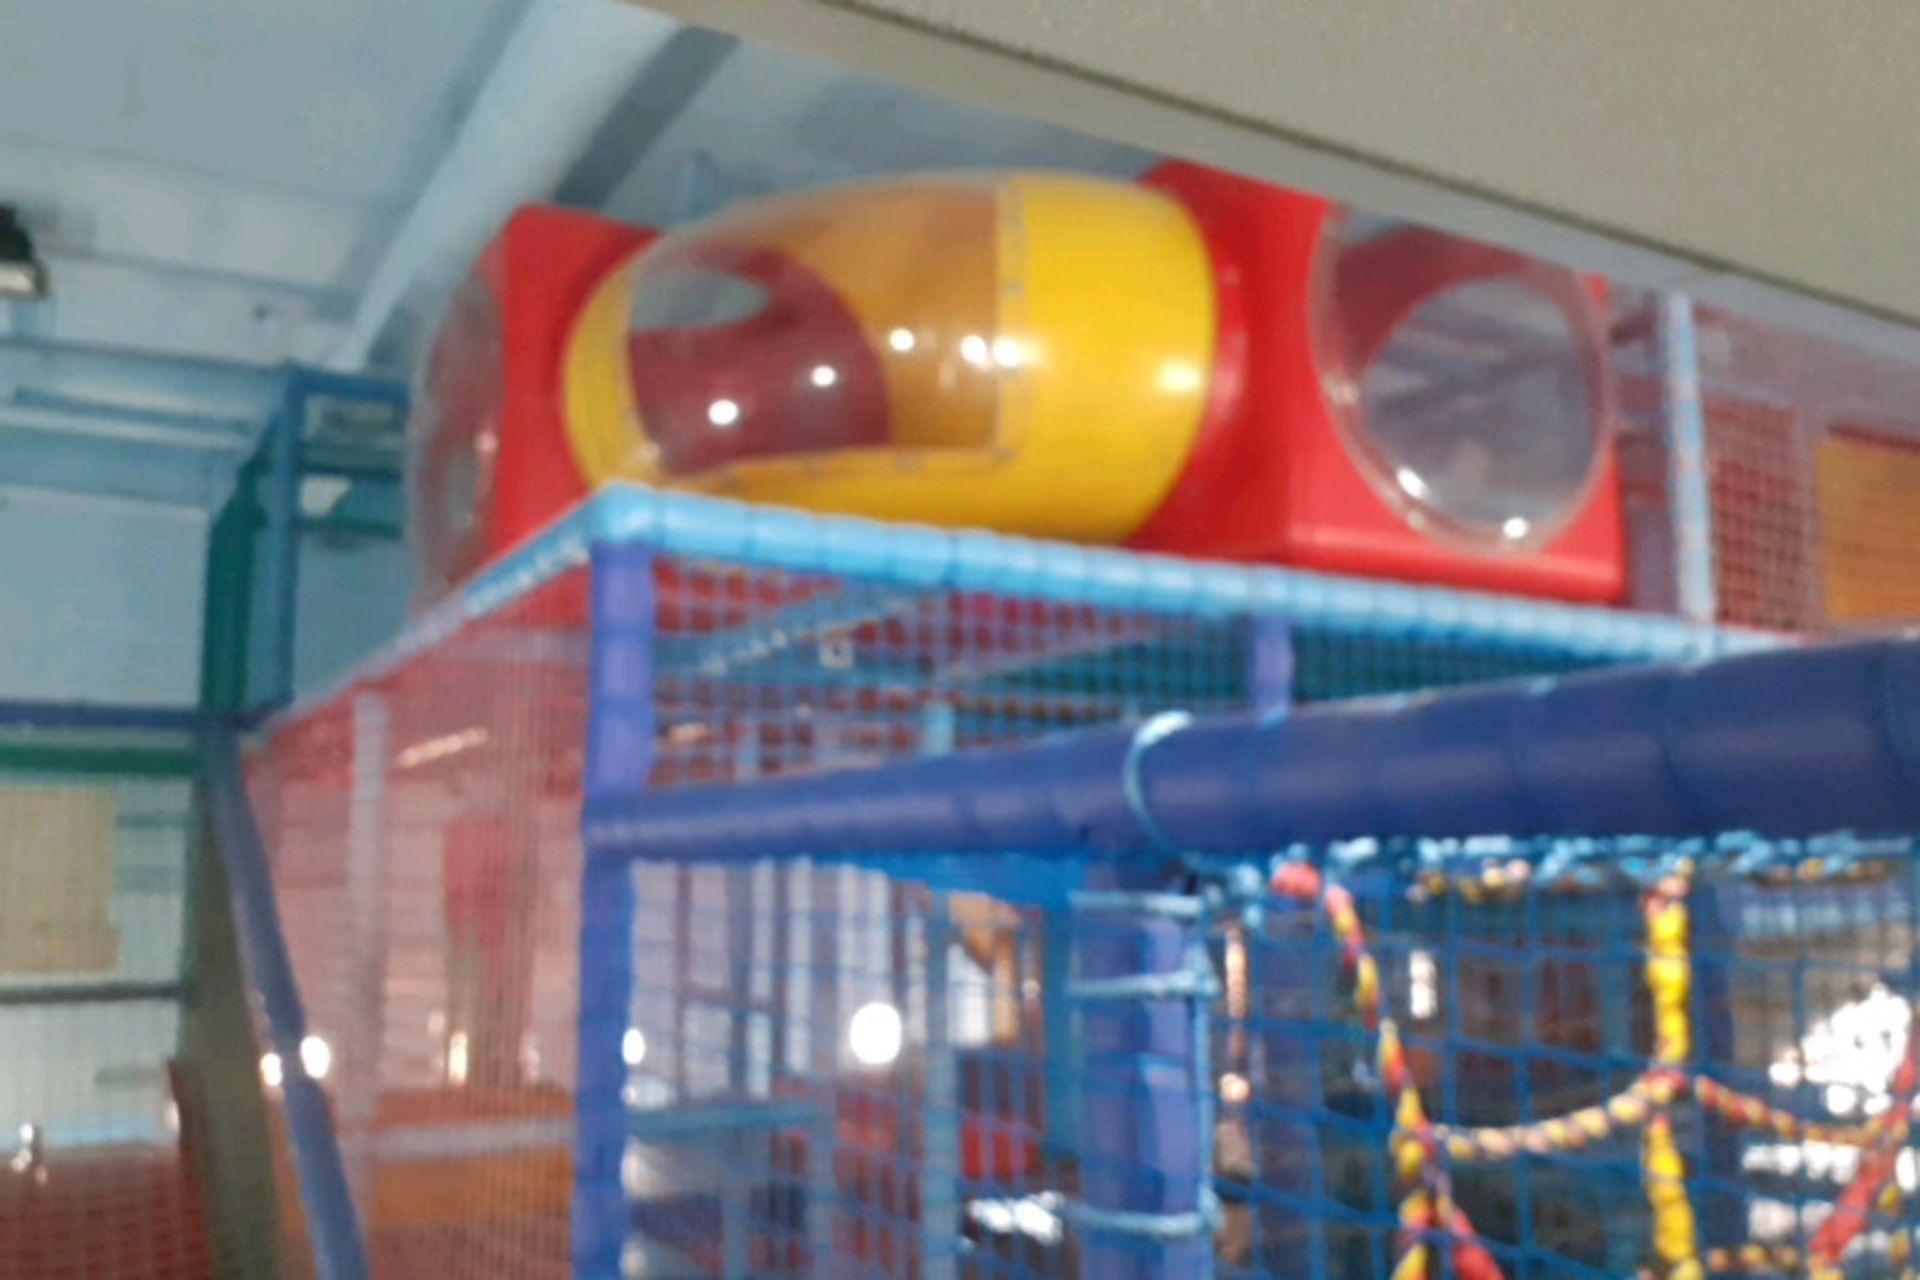 Adventure Reef 2 storey Soft play Facility - Image 15 of 17